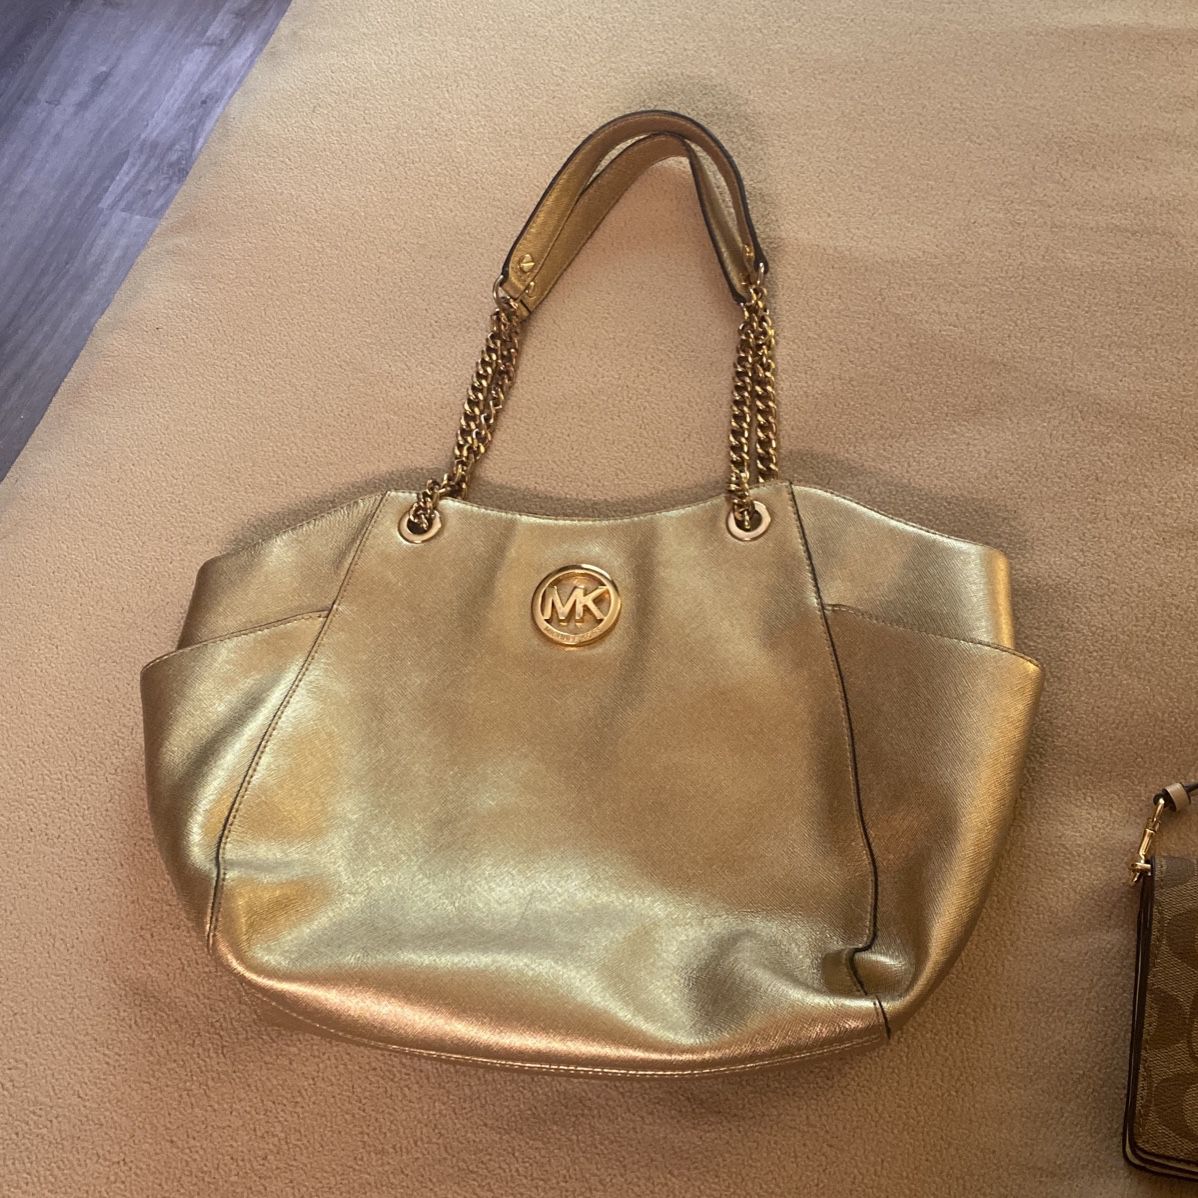 Michael Kors Cindy Dome Crossbody Bag for Sale in Arlington, TX - OfferUp